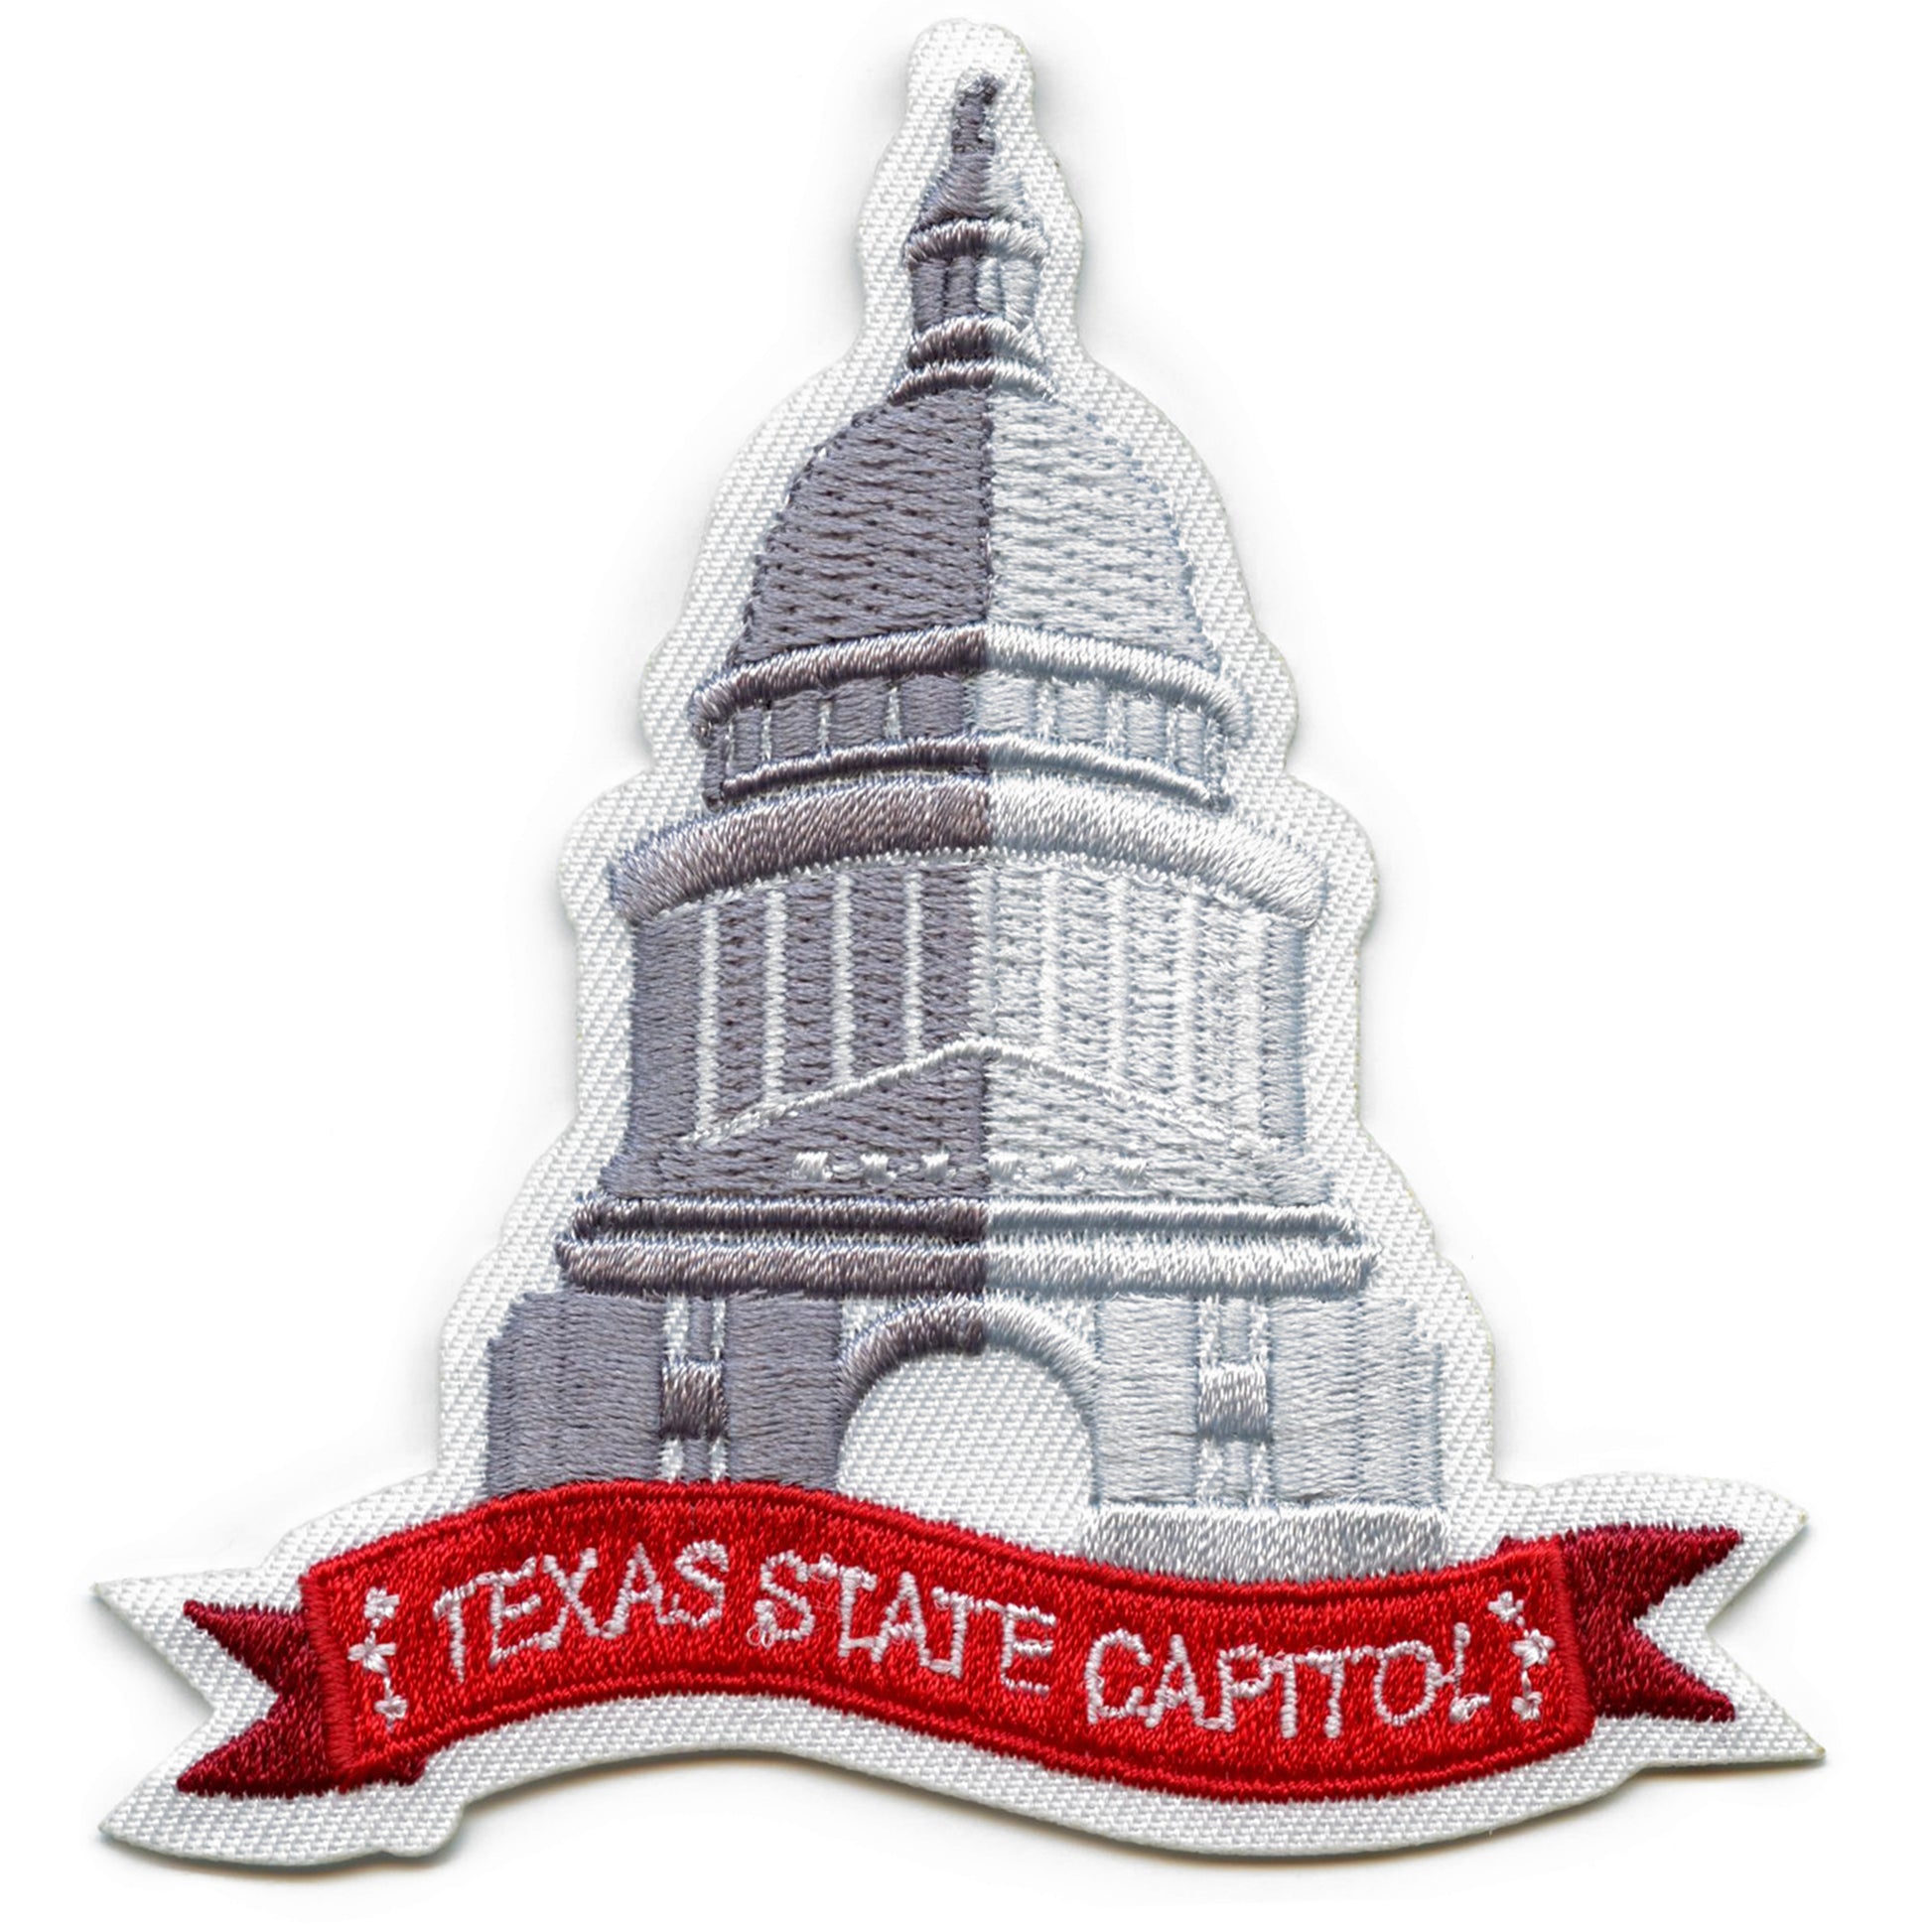 Texas State Capitol In Austin Embroidered Iron On Patch 